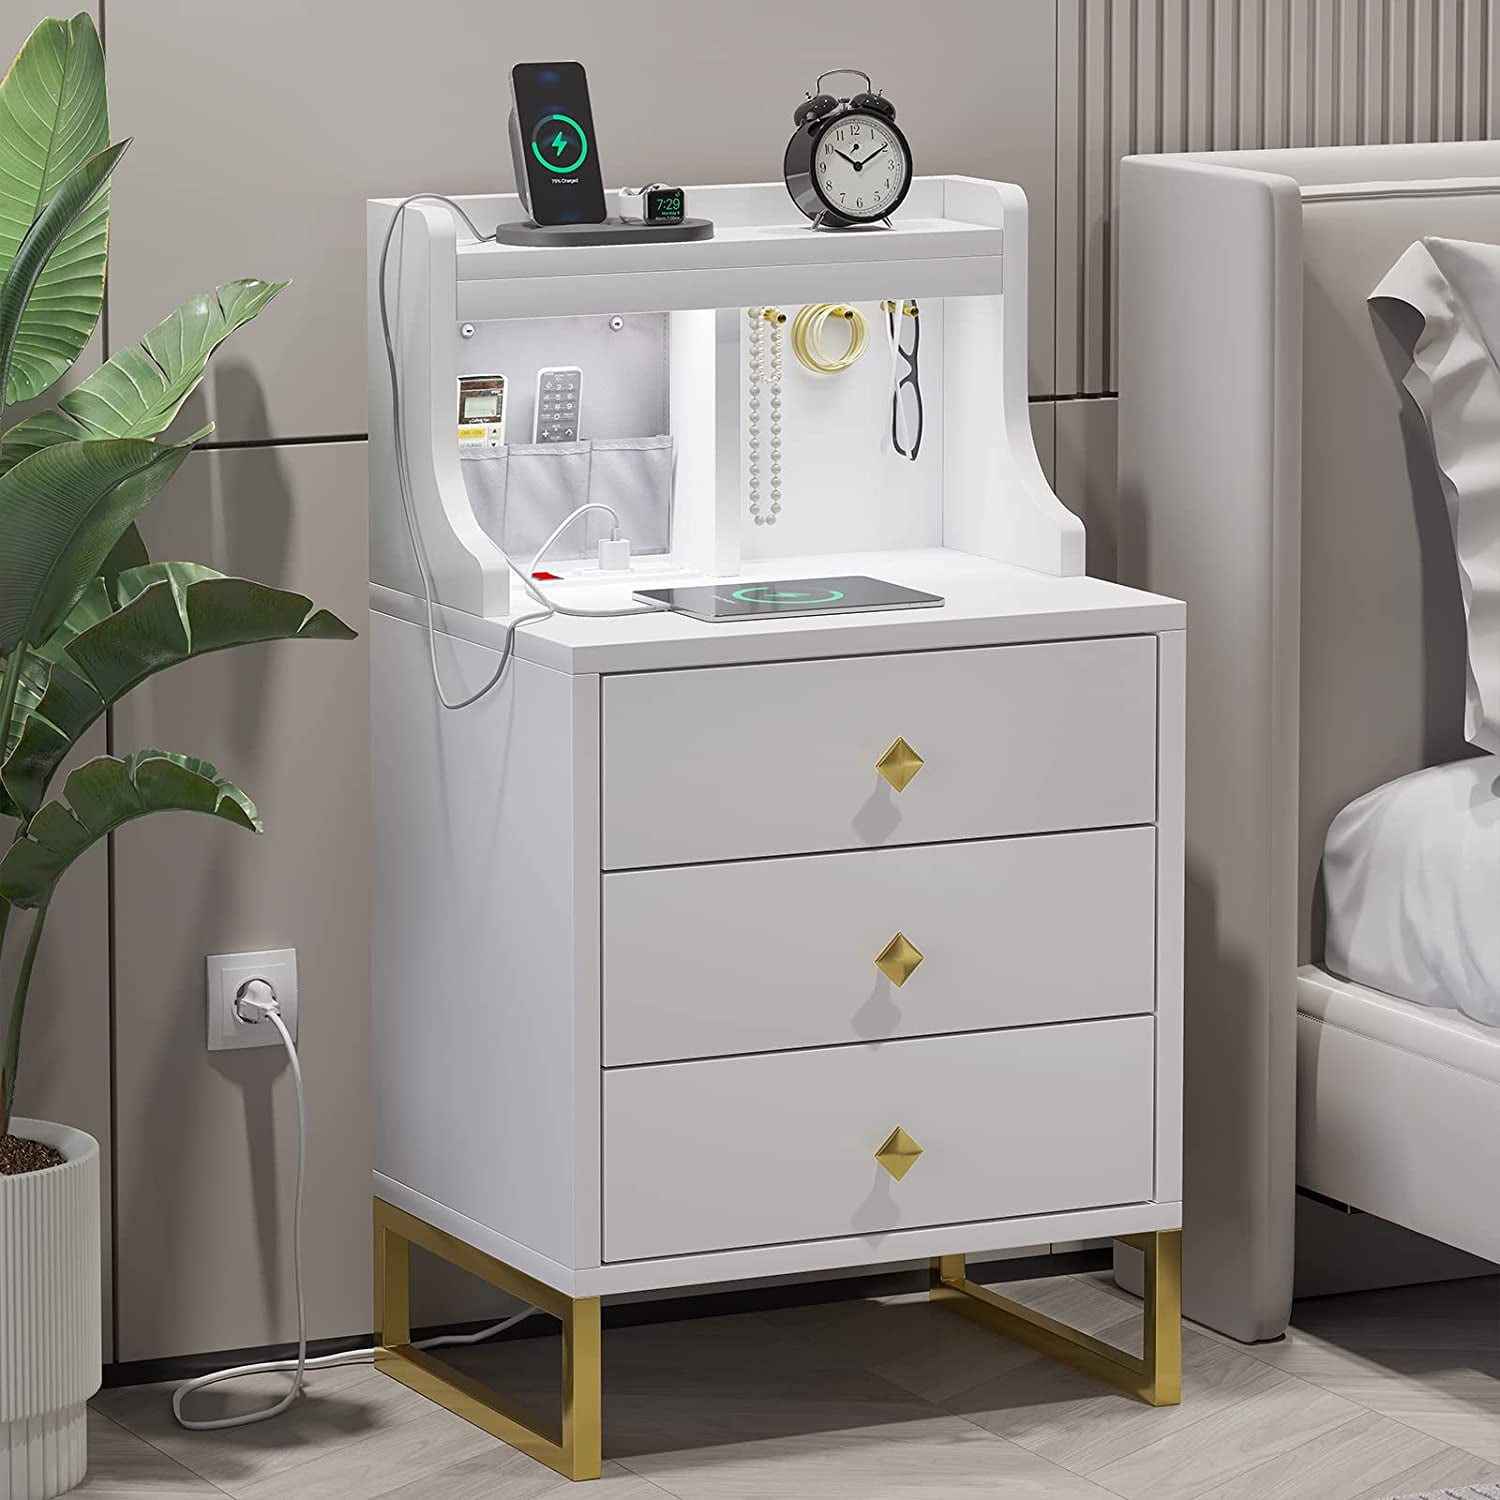 PINNKL Nightstand with Drawer Smart Bedside Table With USB Port, LED Light  Smart Nightstand, Home Bedroom Furniture, Bedside Table with Drawers (Size